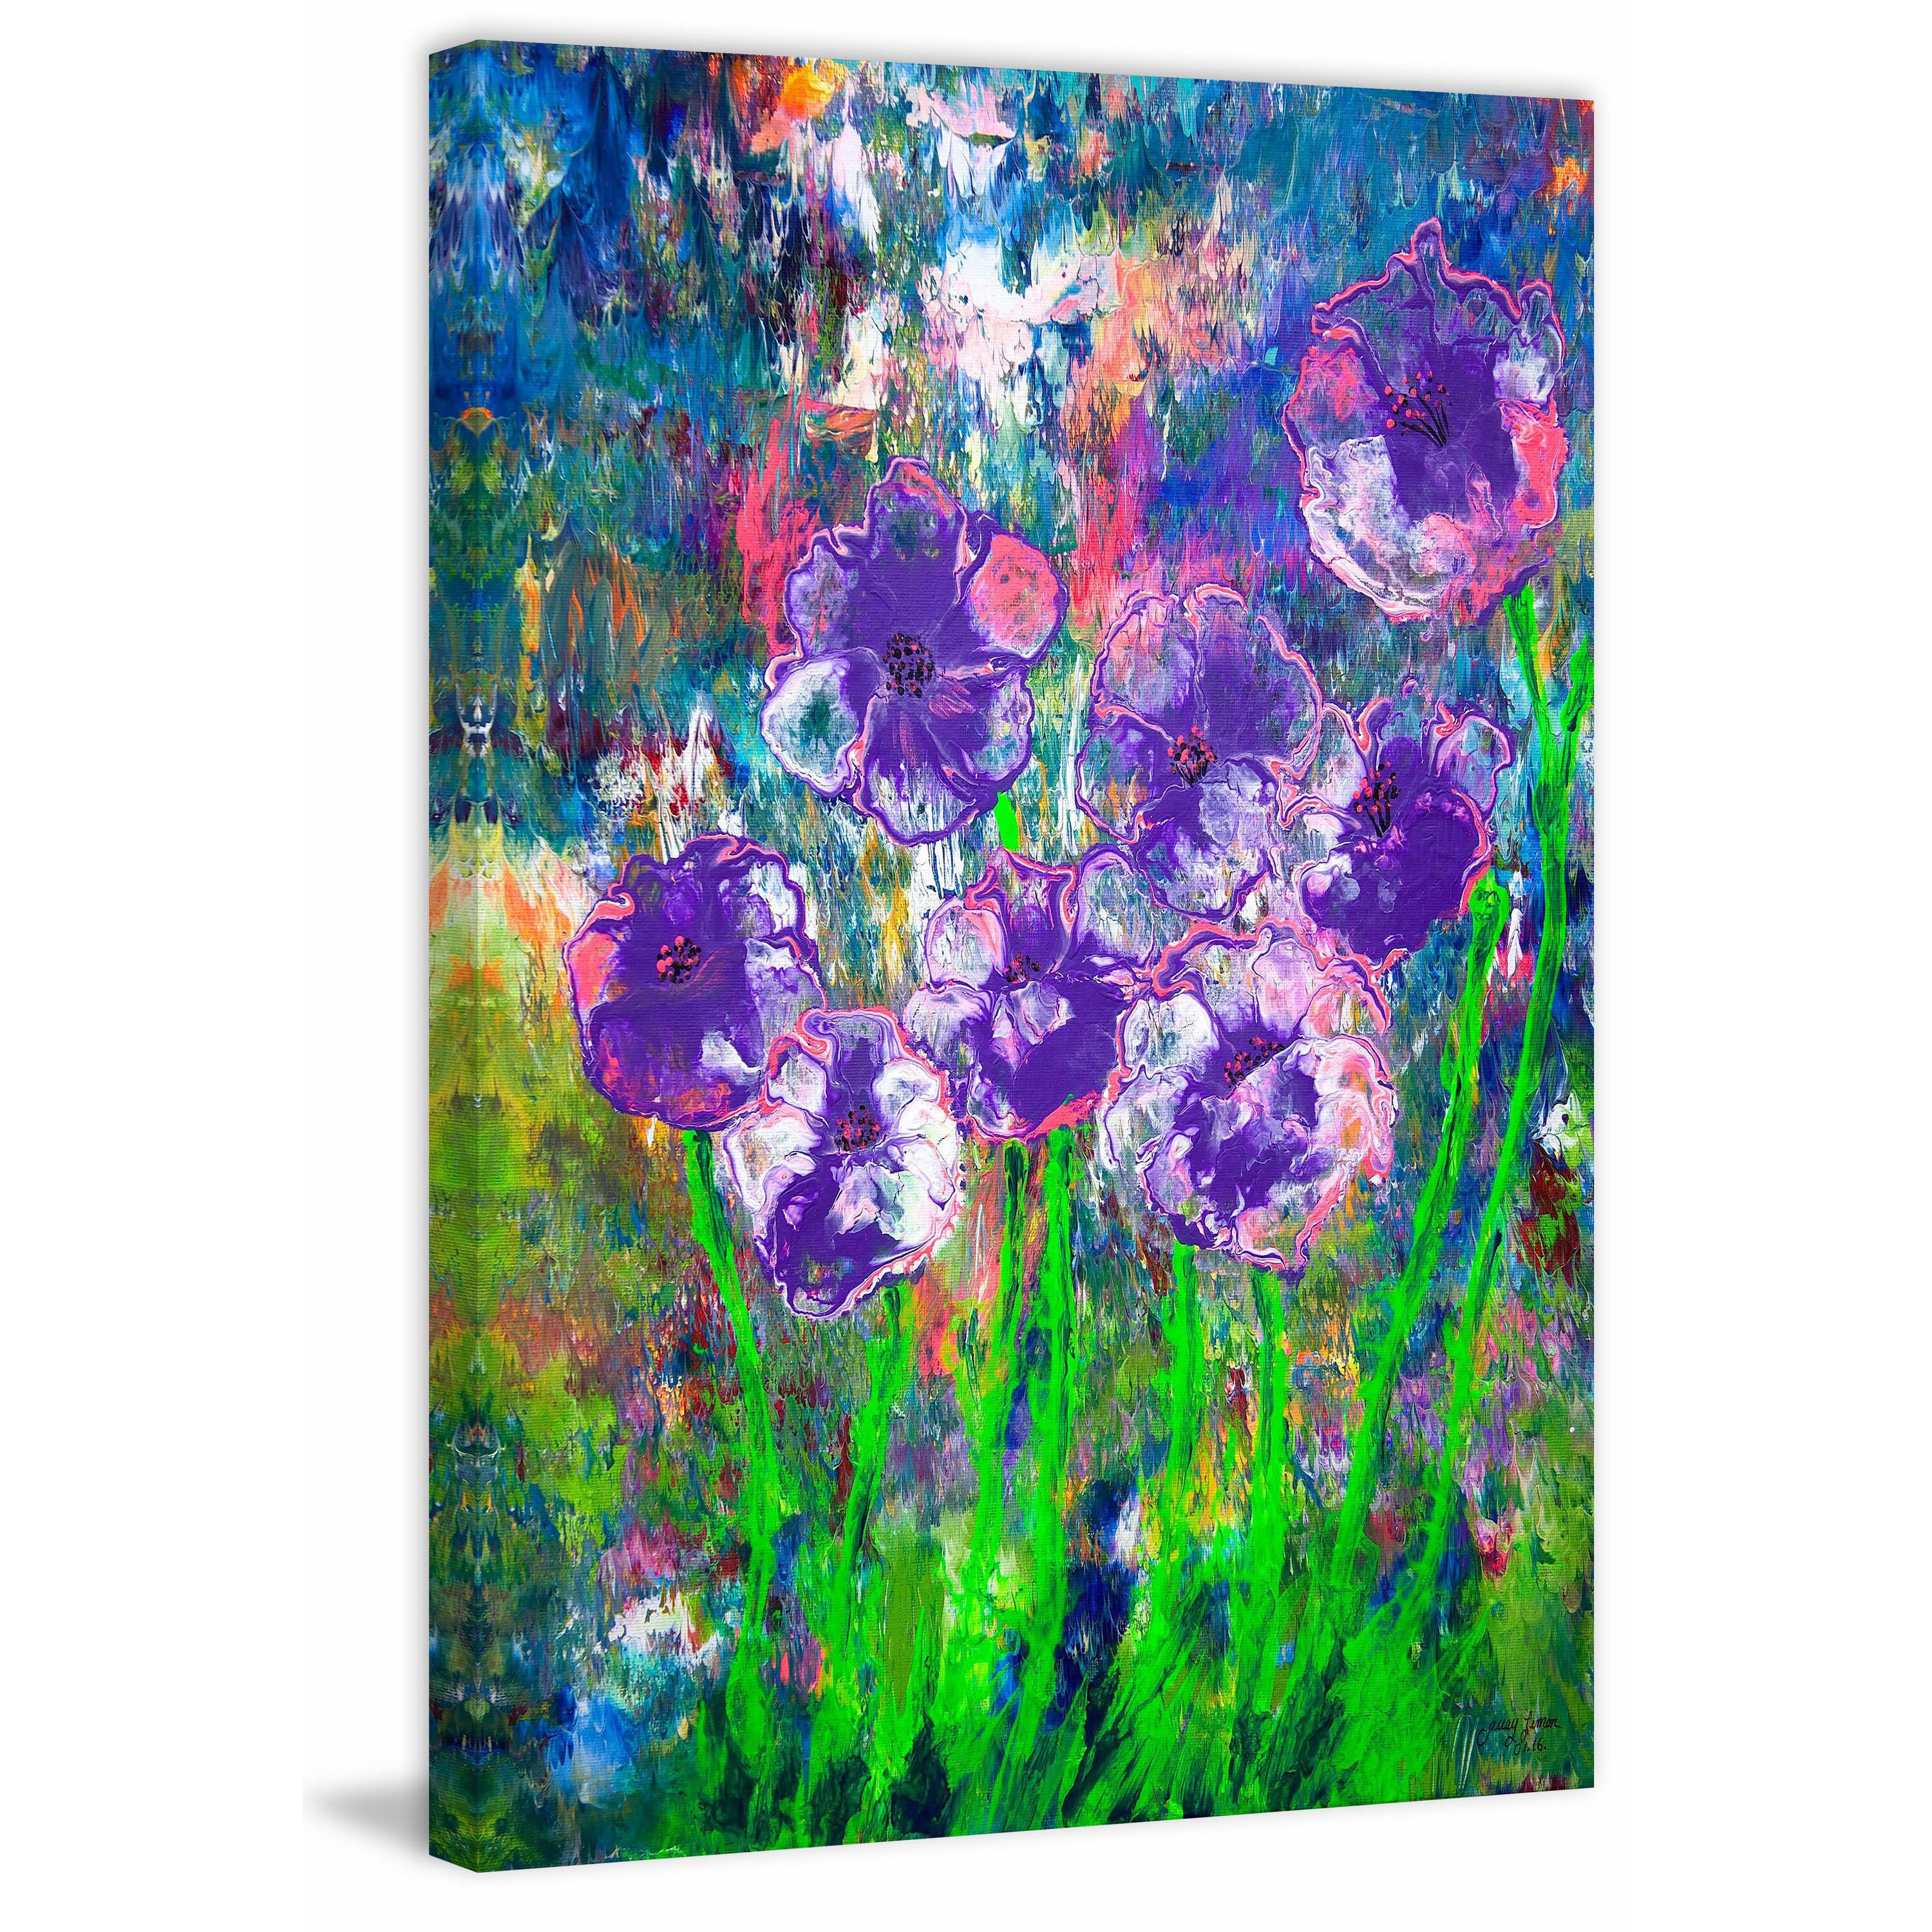 Buy Gallery Wrapped Canvas Online At Overstock Our Best Canvas Art Deals